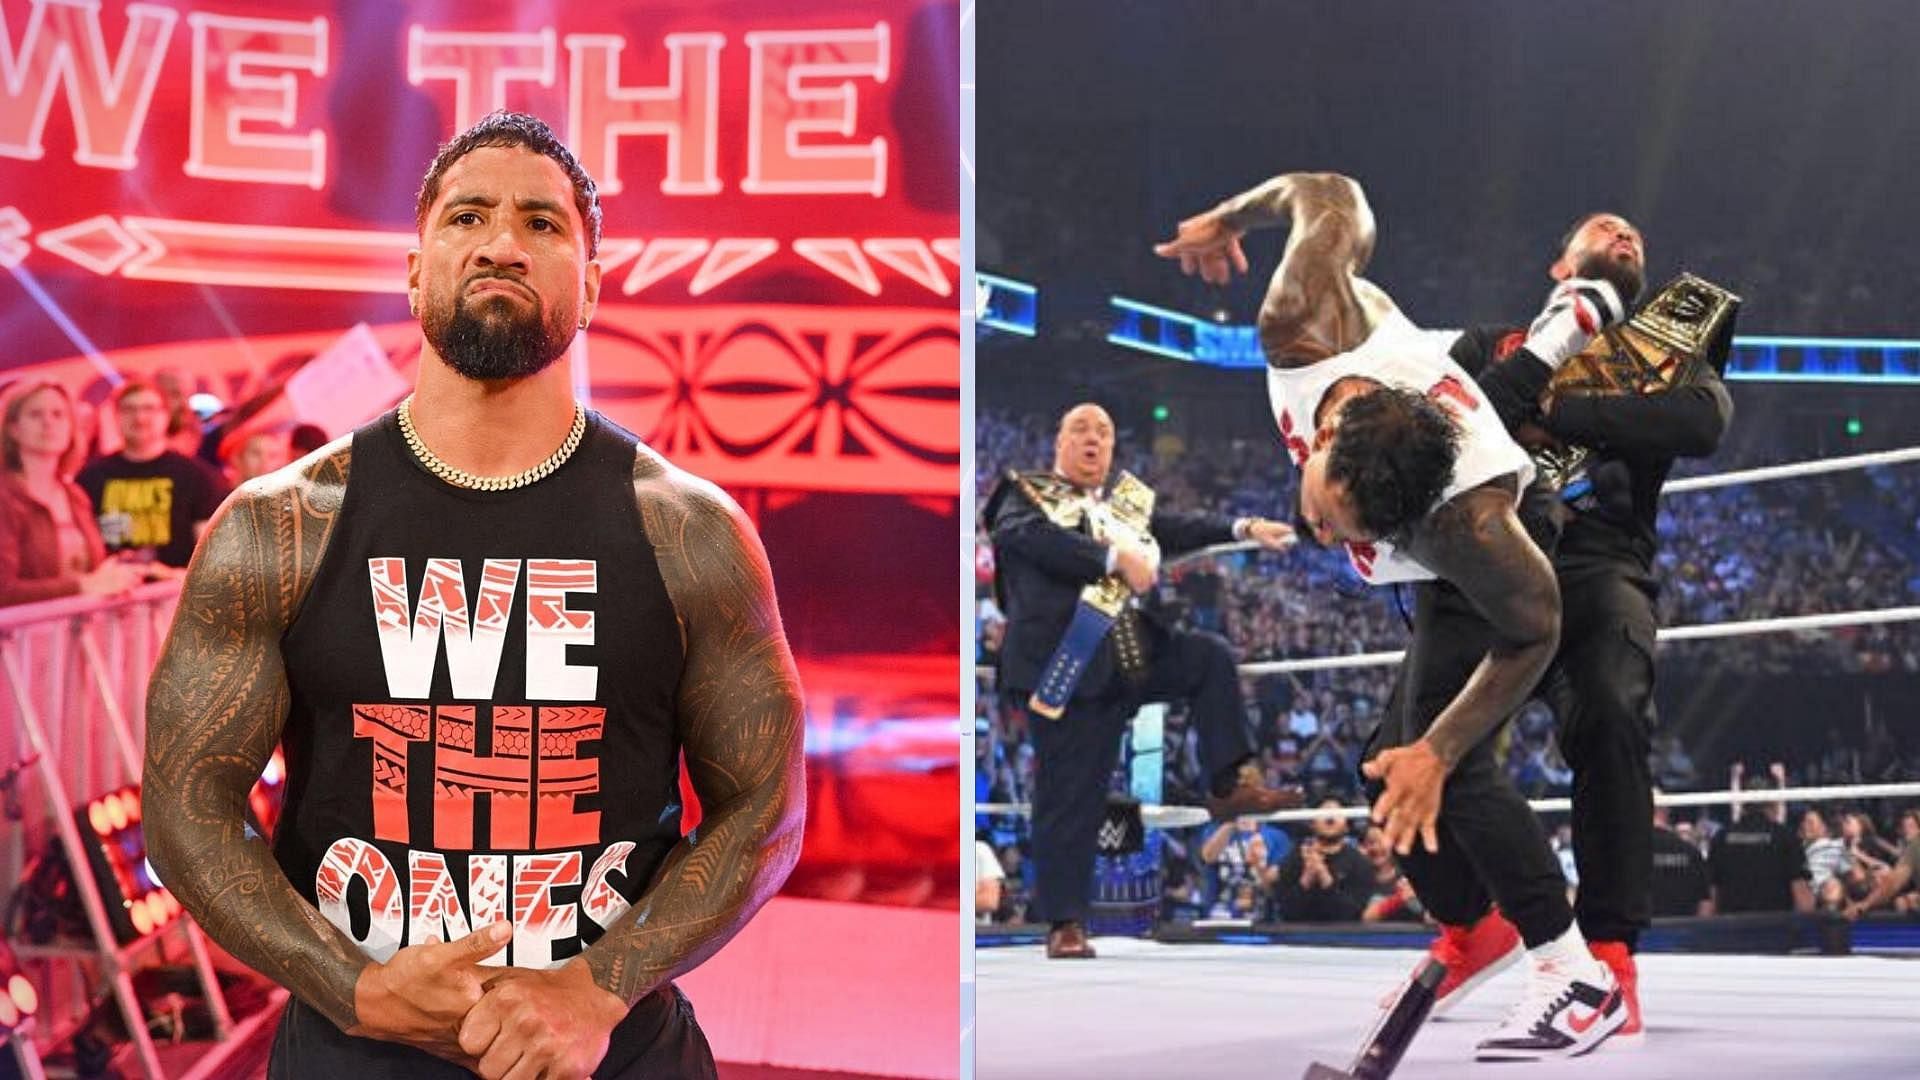 Jey Uso surprised the world by Superkicking Roman Reigns on WWE SmackDown